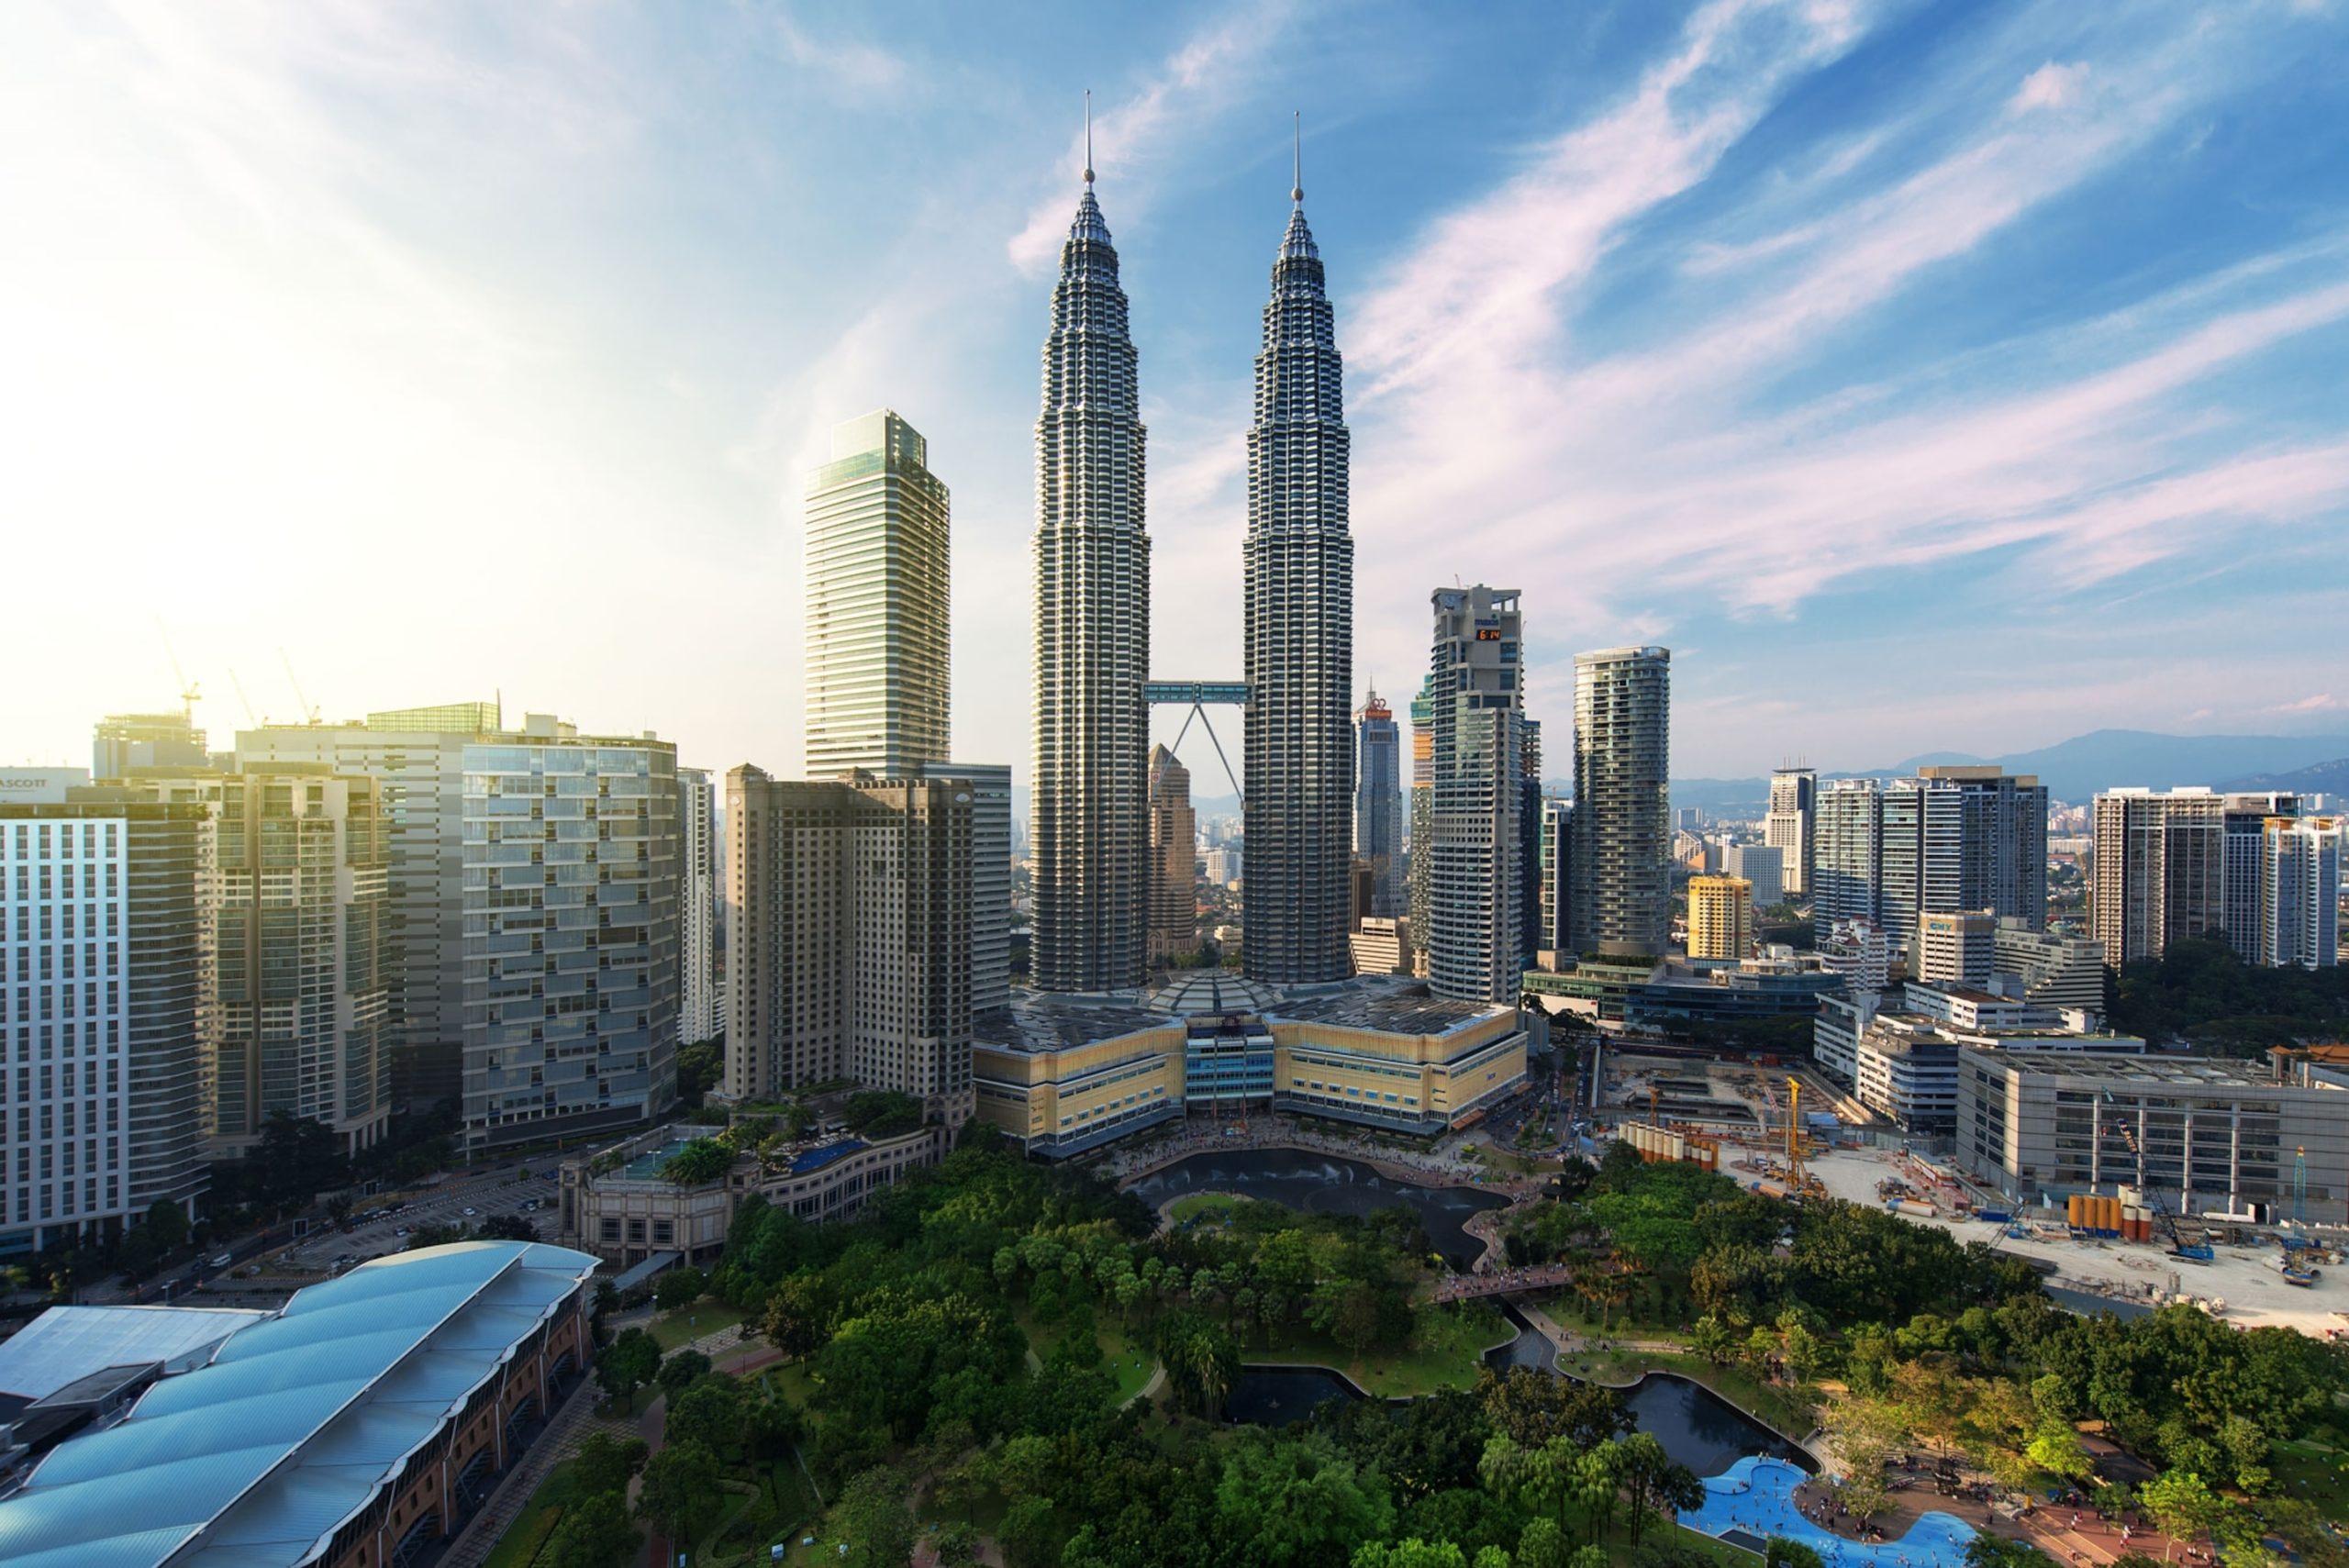 unveiling malaysia: a road trip adventure through scenic wonders